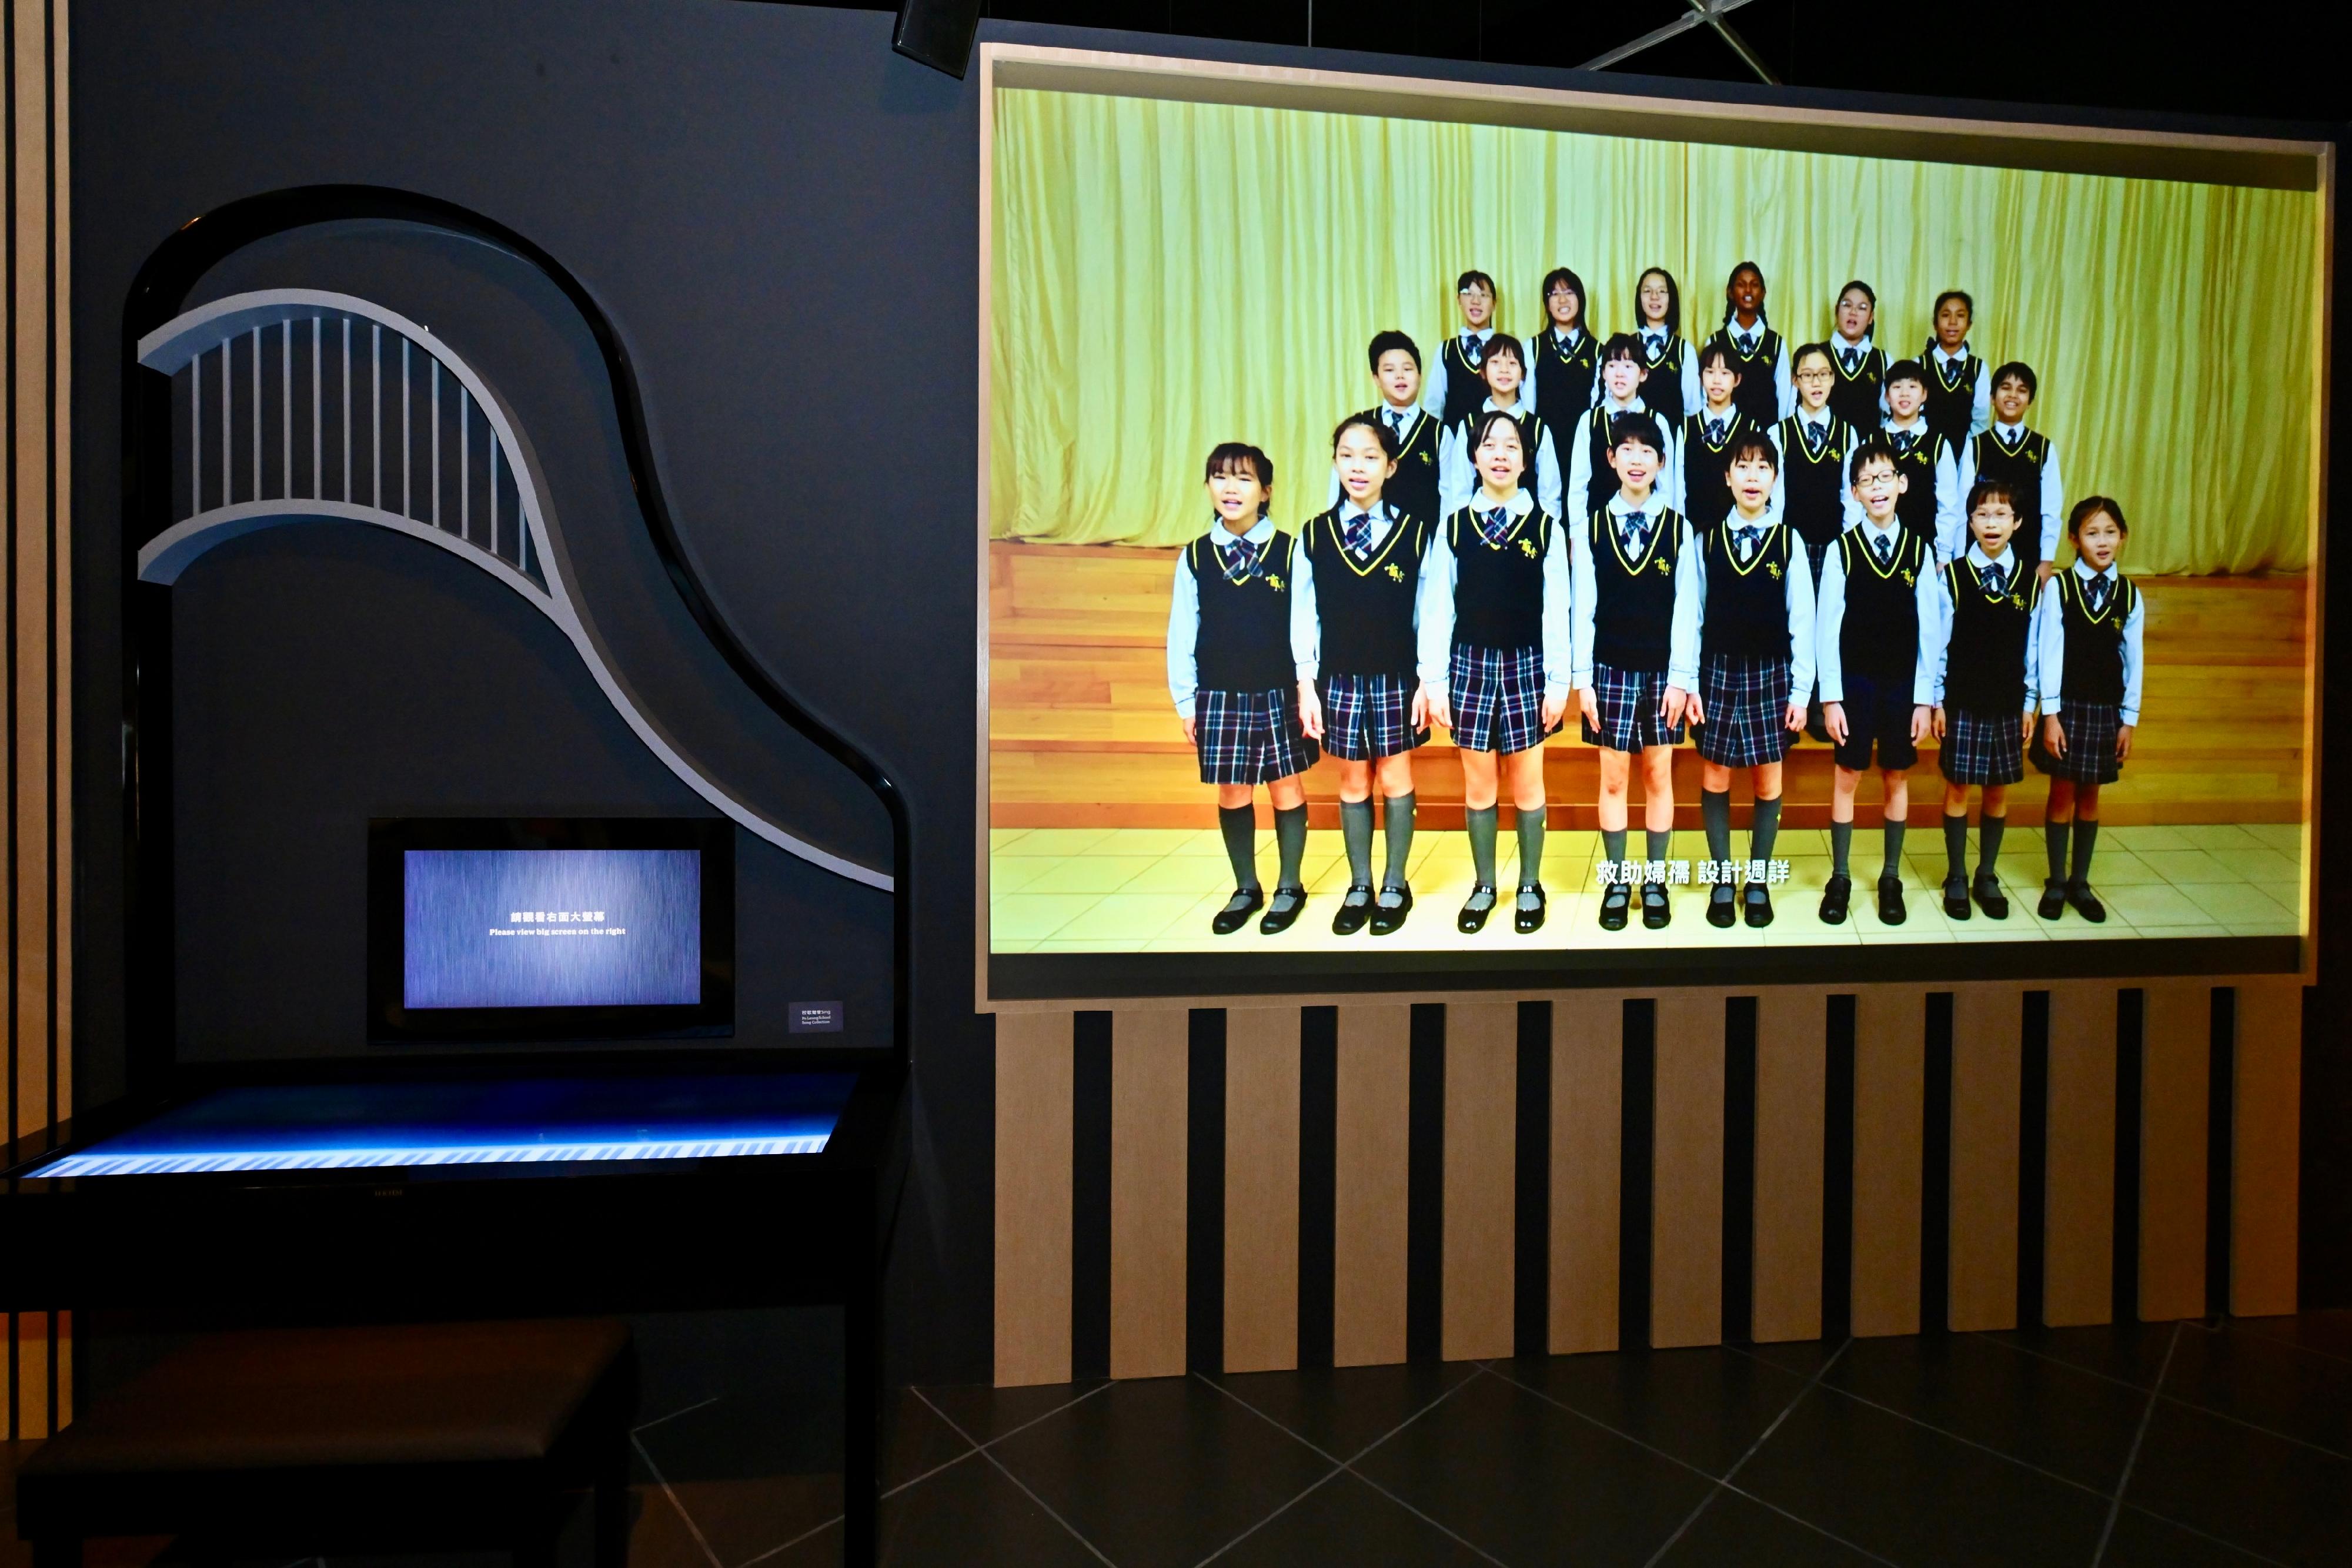 The opening ceremony for the exhibition "Po Leung Kuk 145th Anniversary: Building Charity with Benevolence" was held today (October 17) at the Hong Kong Heritage Museum. Photo shows a multimedia game and projection, "Po Leung School Song Collection", which allows visitors to play the music of school anthems of Po Leung Kuk in different eras.